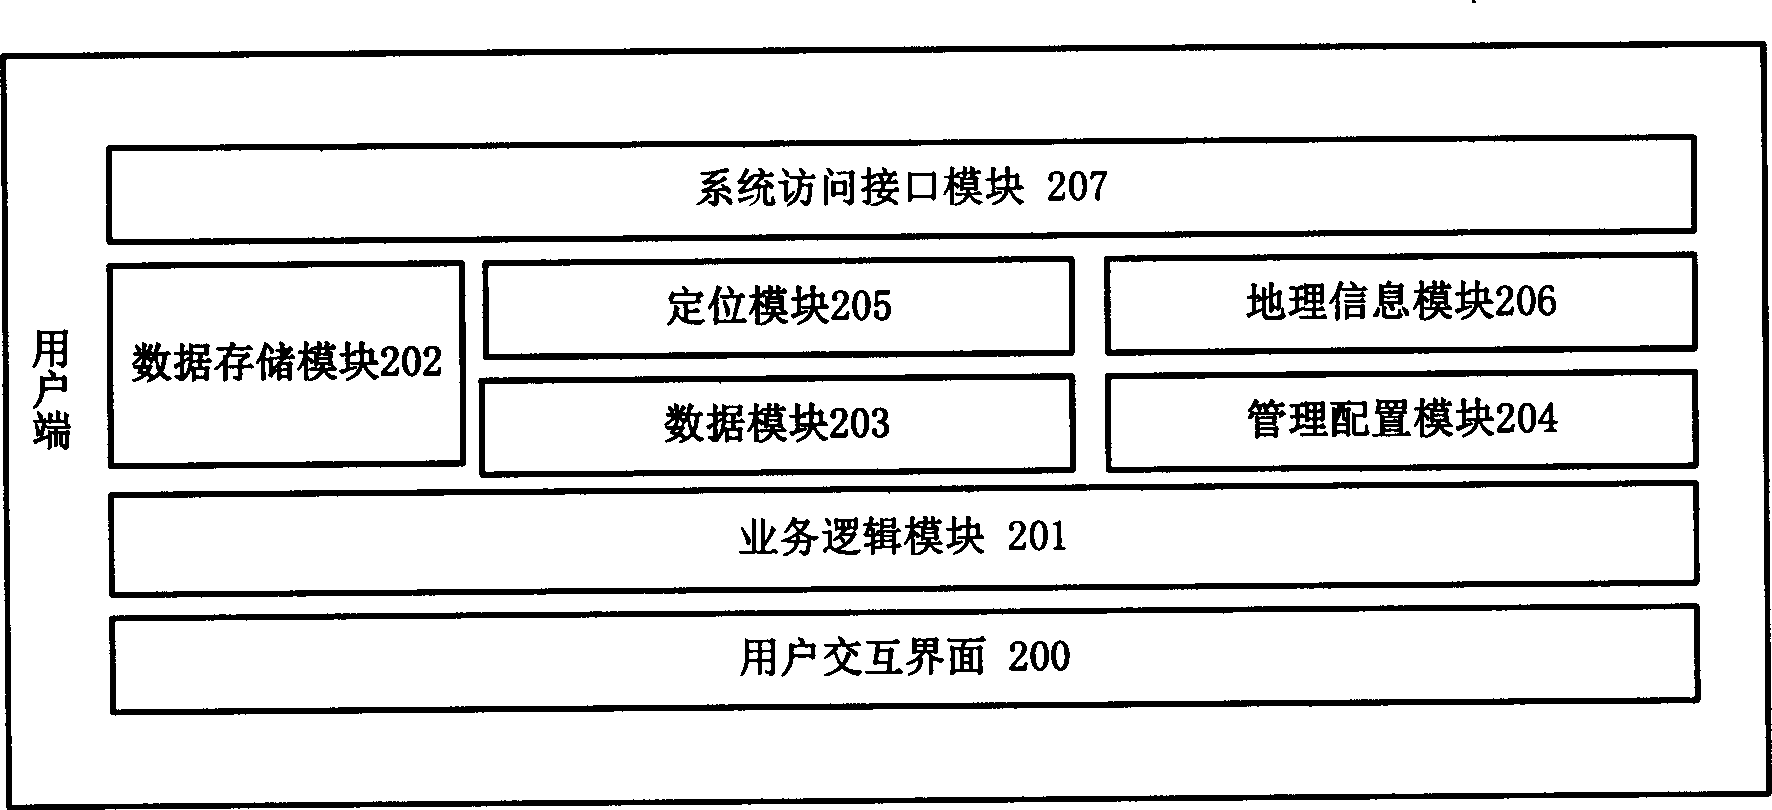 Information acquisition method based on positions